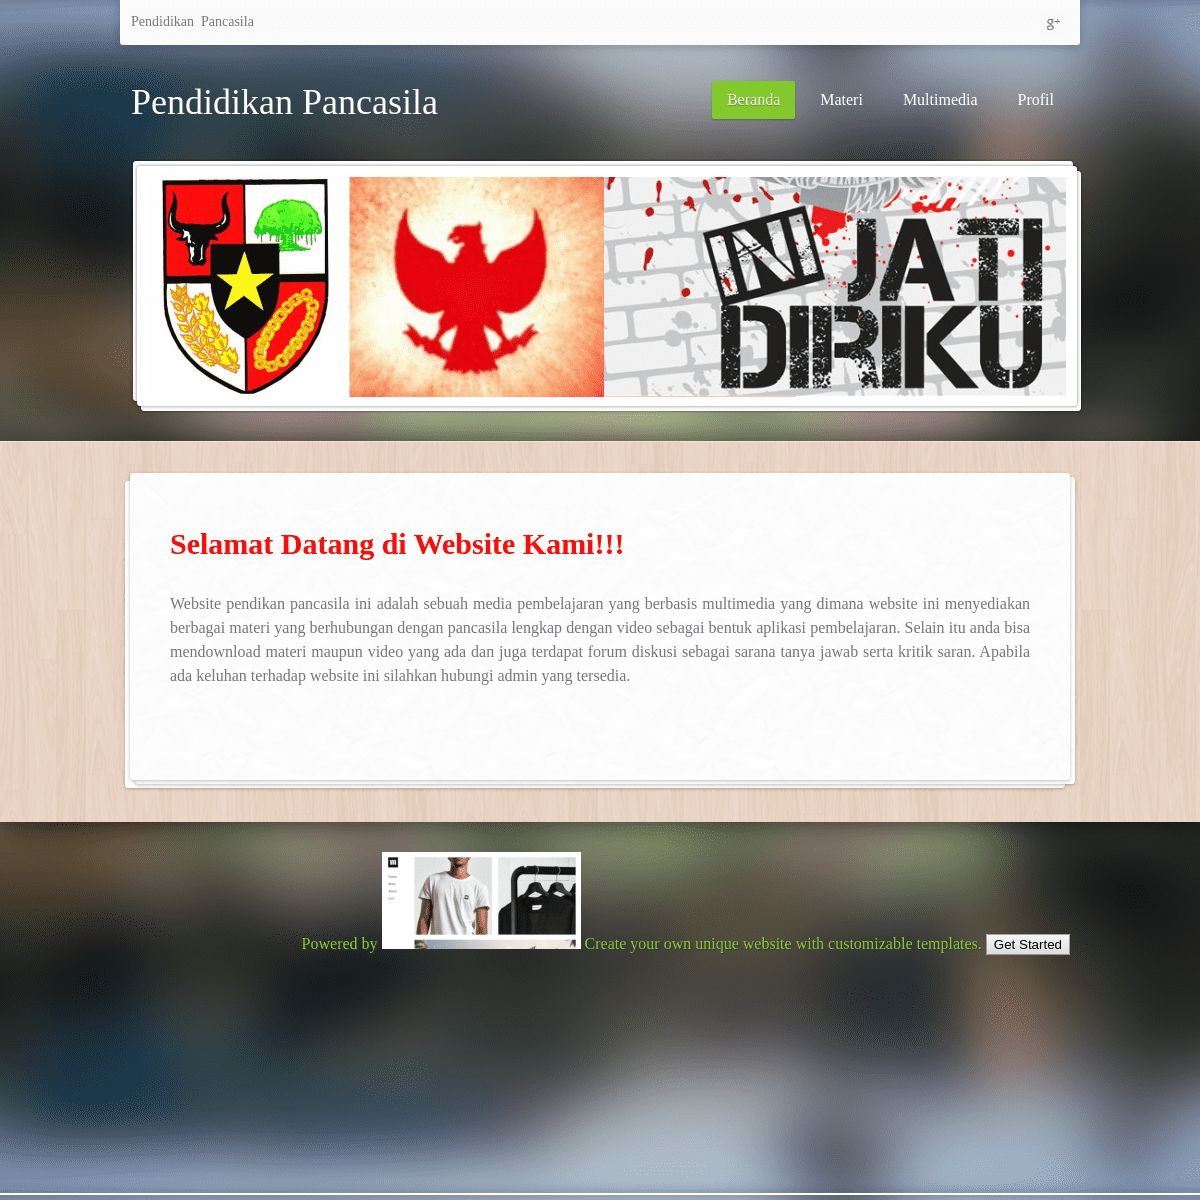 A complete backup of pancasila.weebly.com